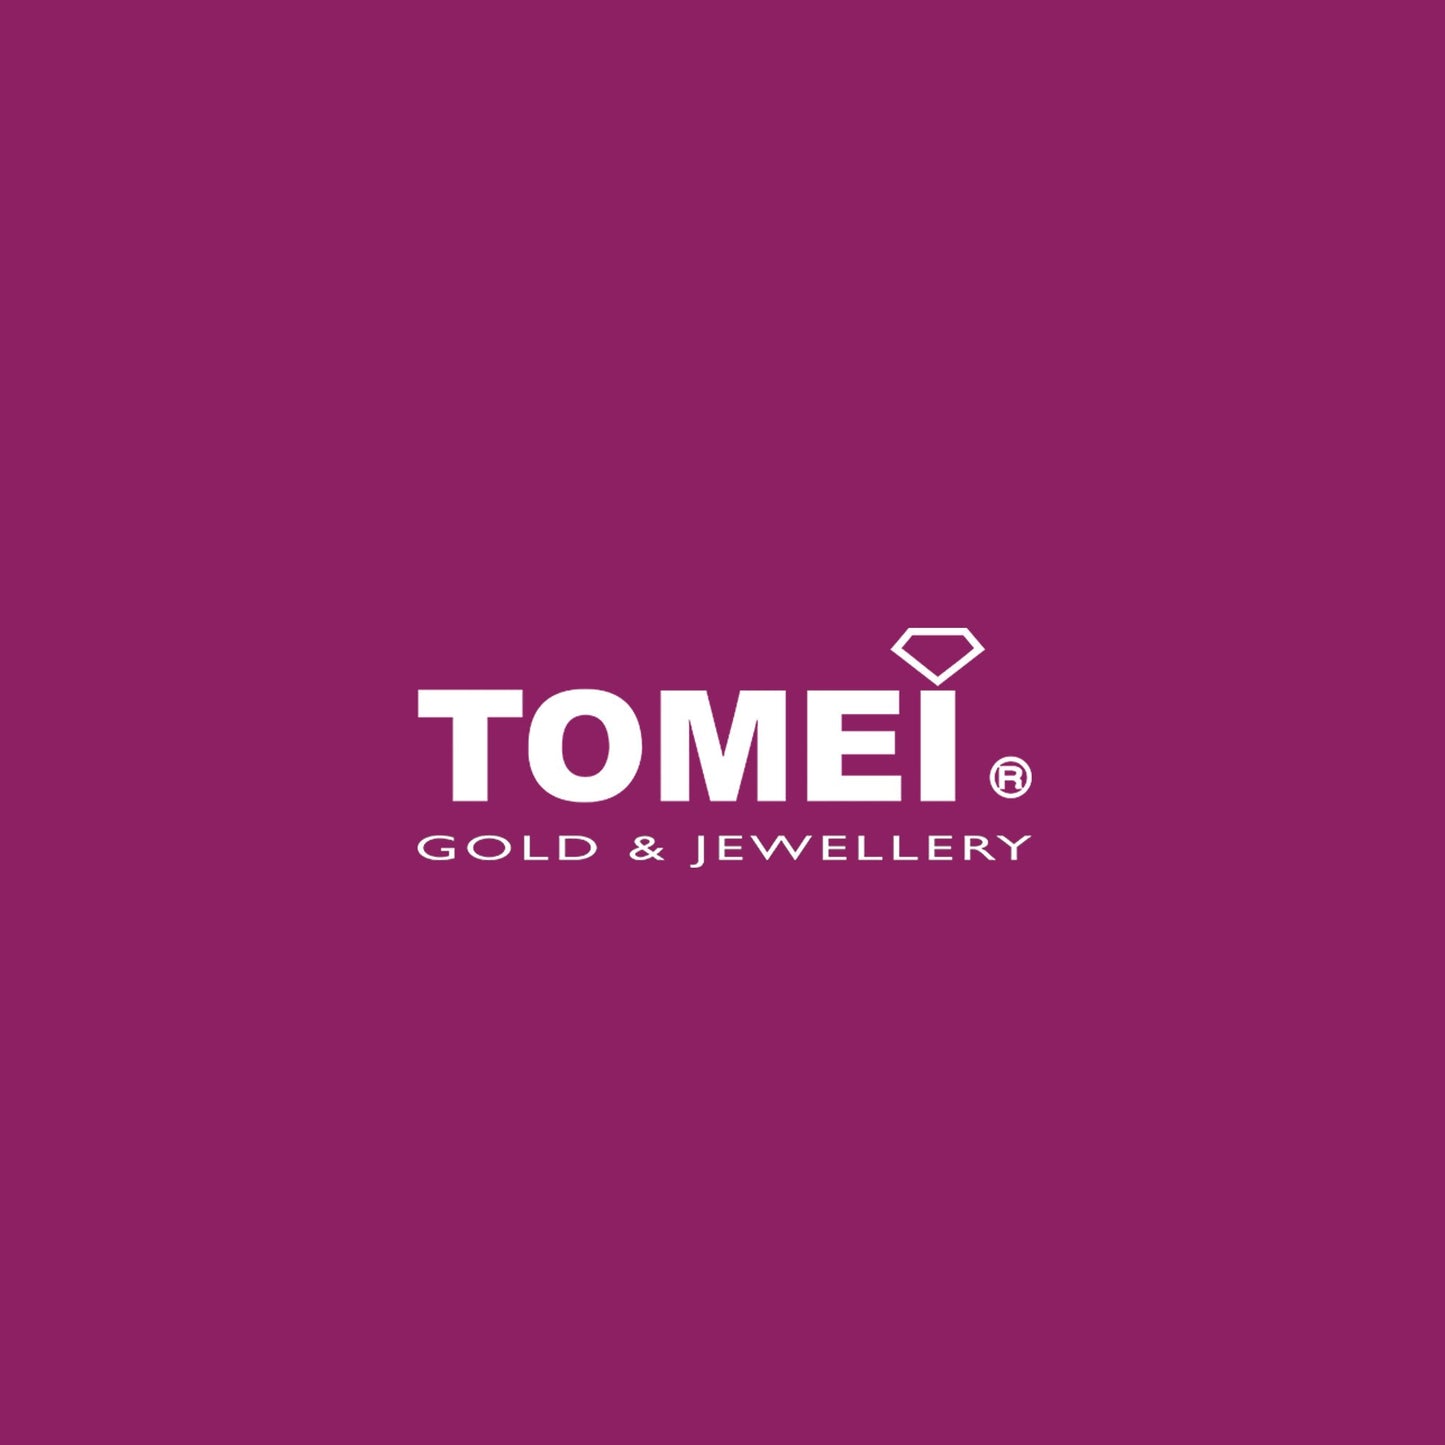 TOMEI EB Evermore Ring For Her, White+Rose Gold 750